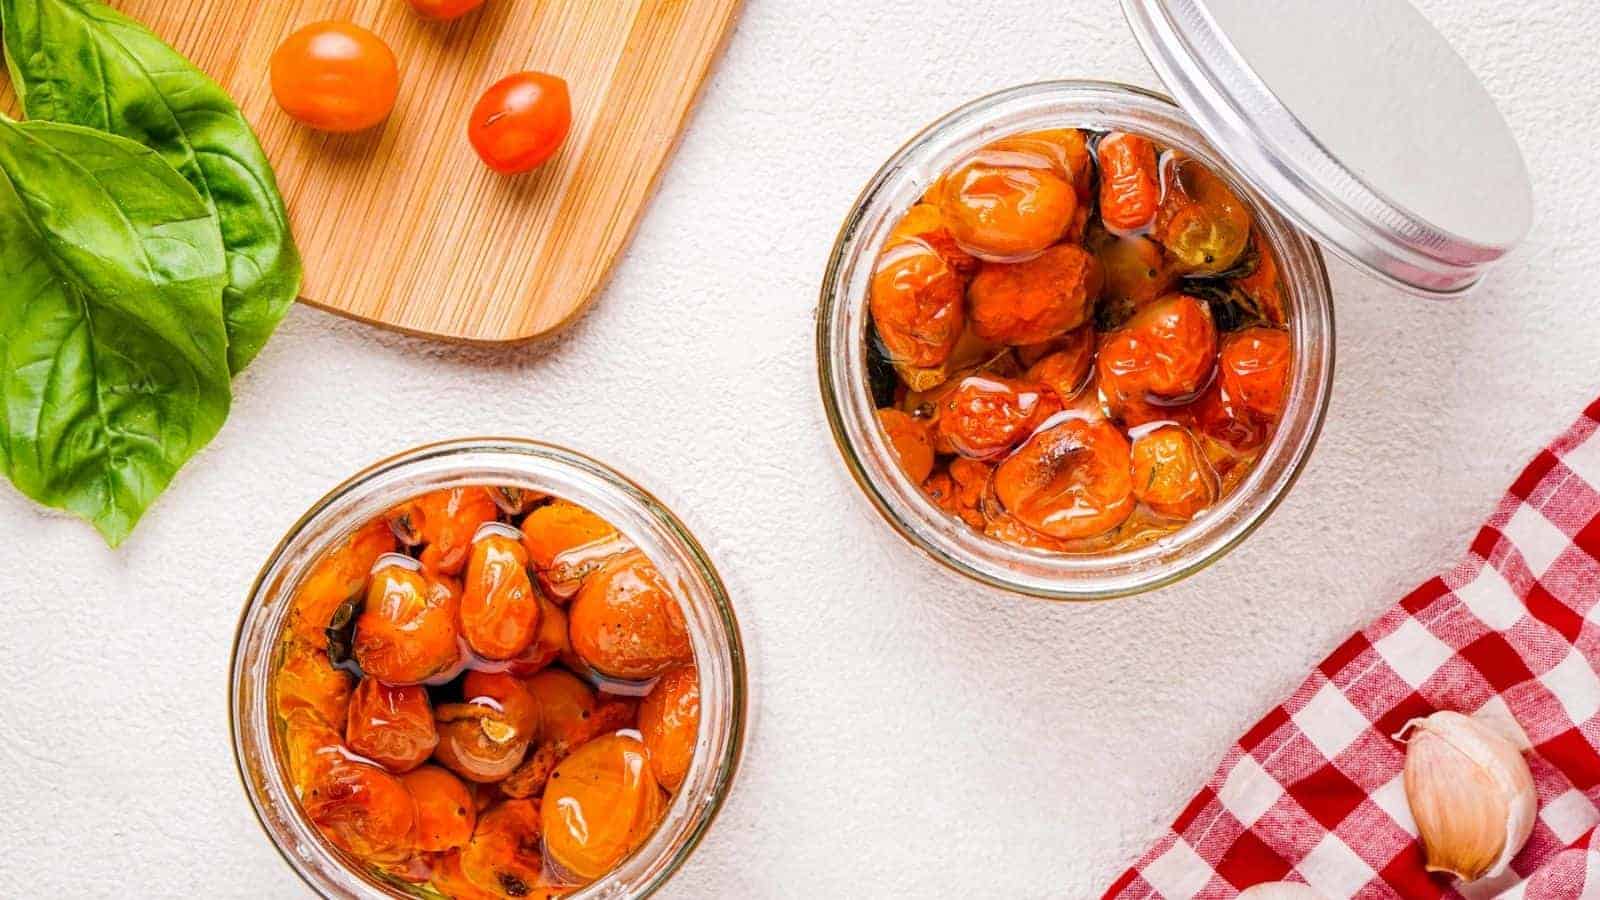 Two glass jars of cherry tomatoes and garlic confit on a white surface.